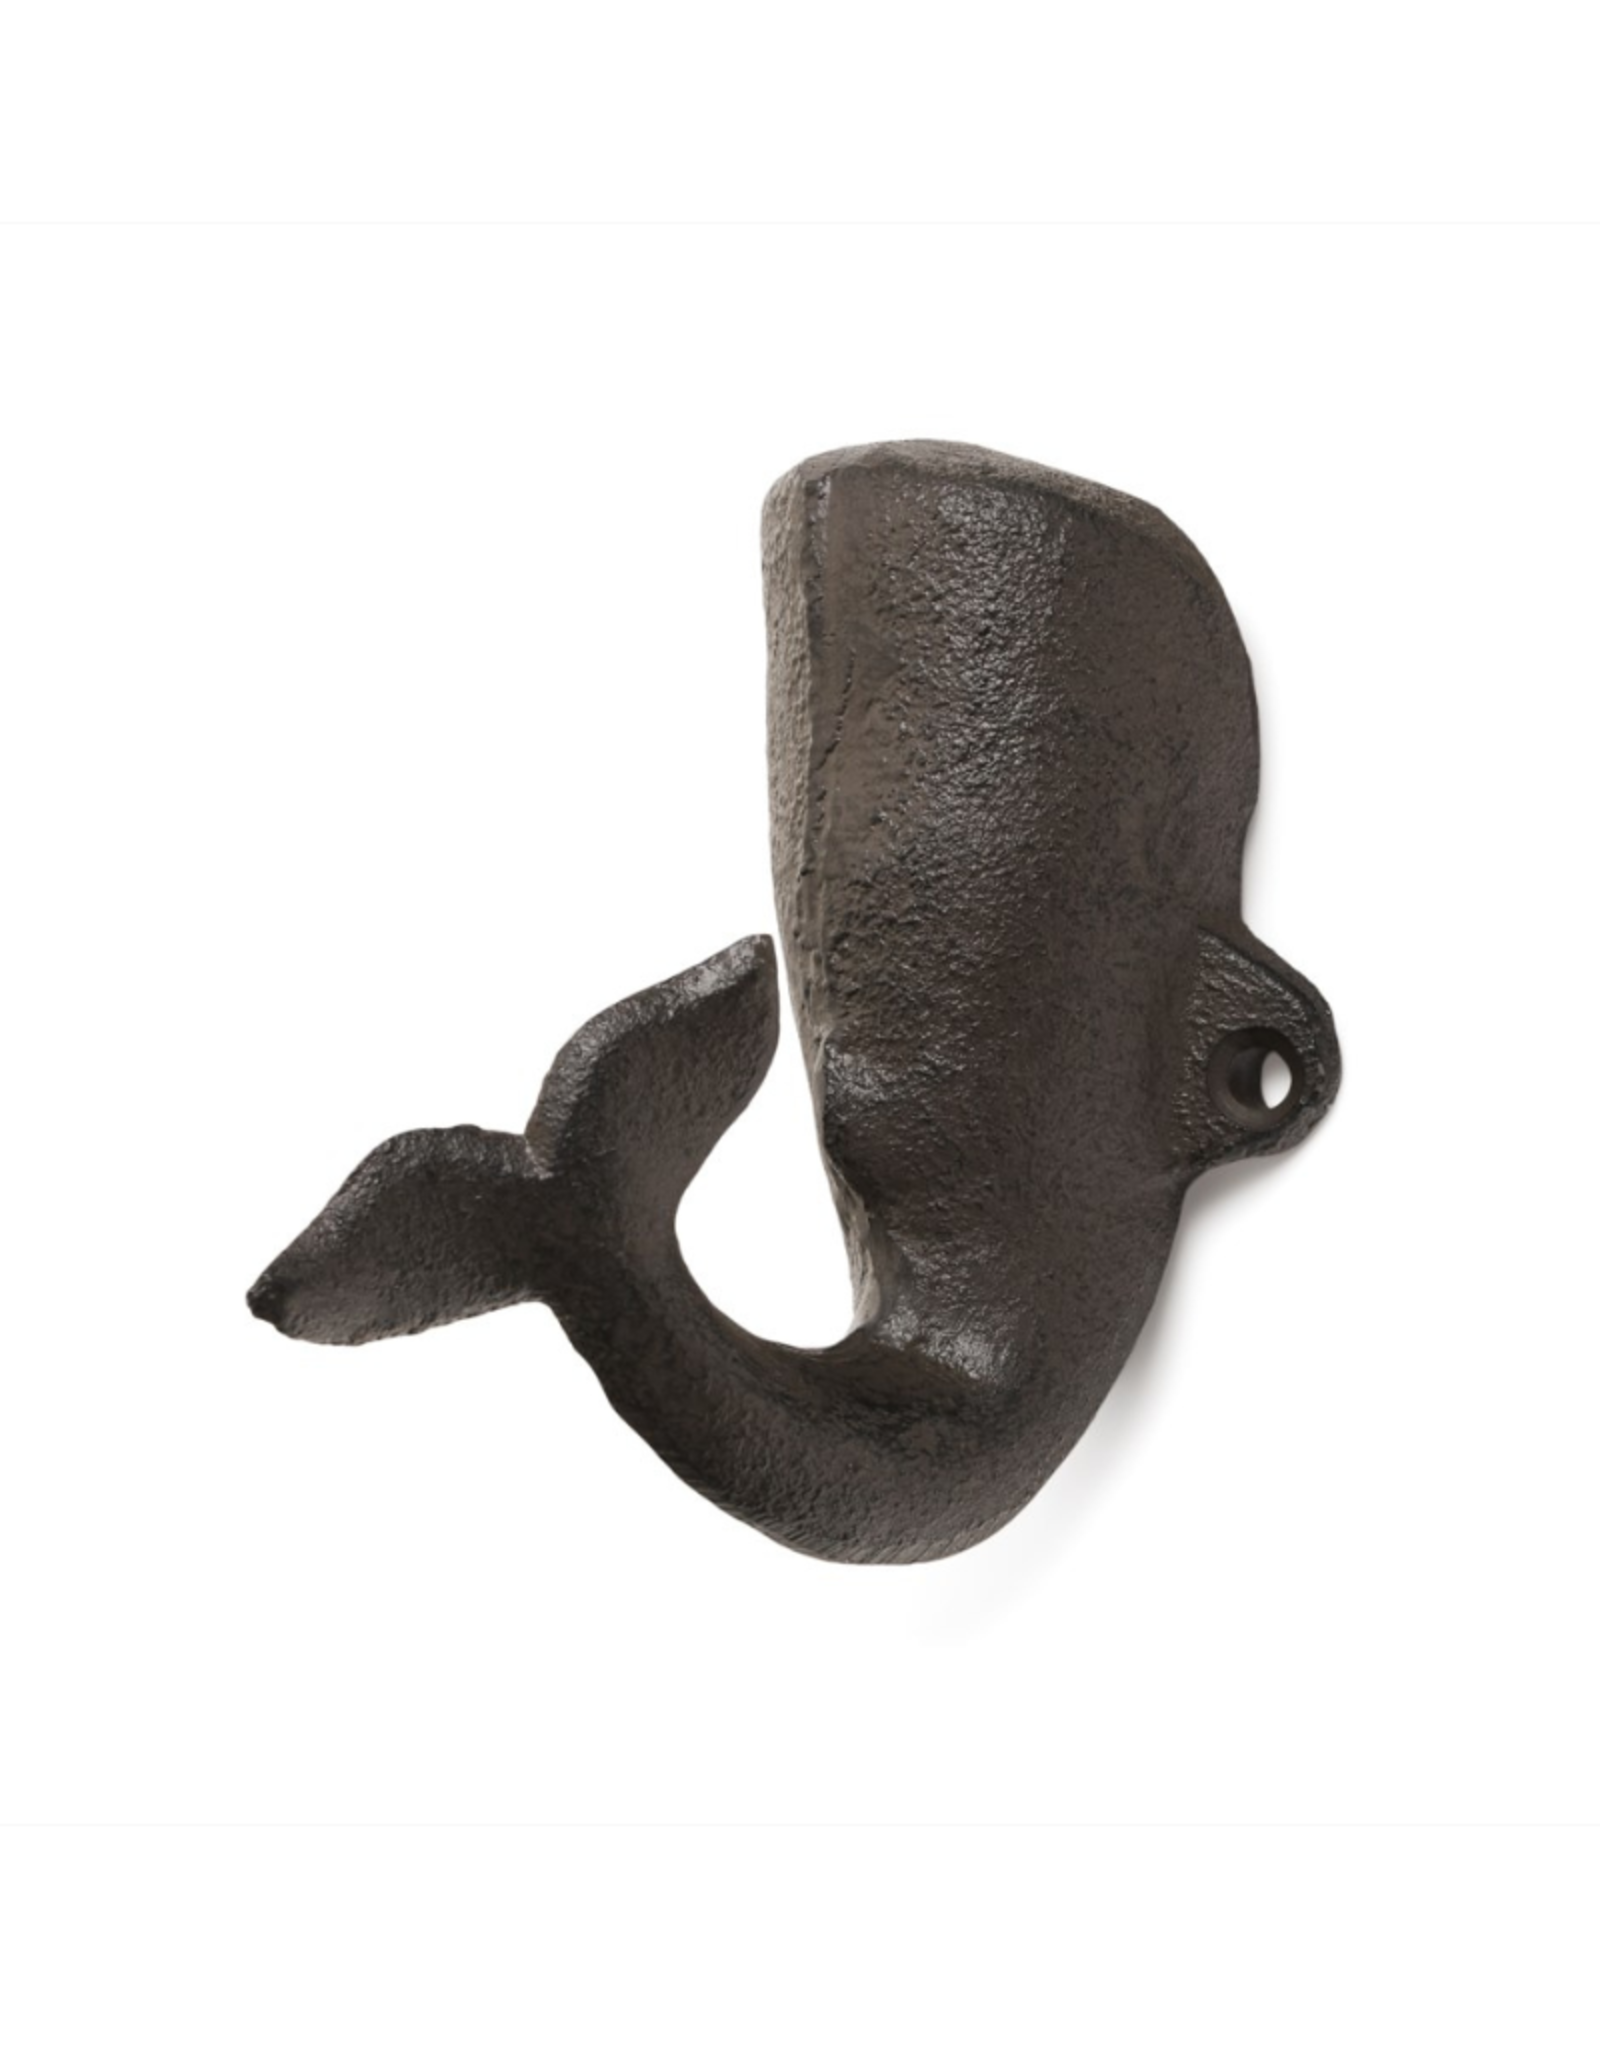 Cast Iron SPERM WHALE Wall HOOK 6 1/2 Long Antique Patina Finish 